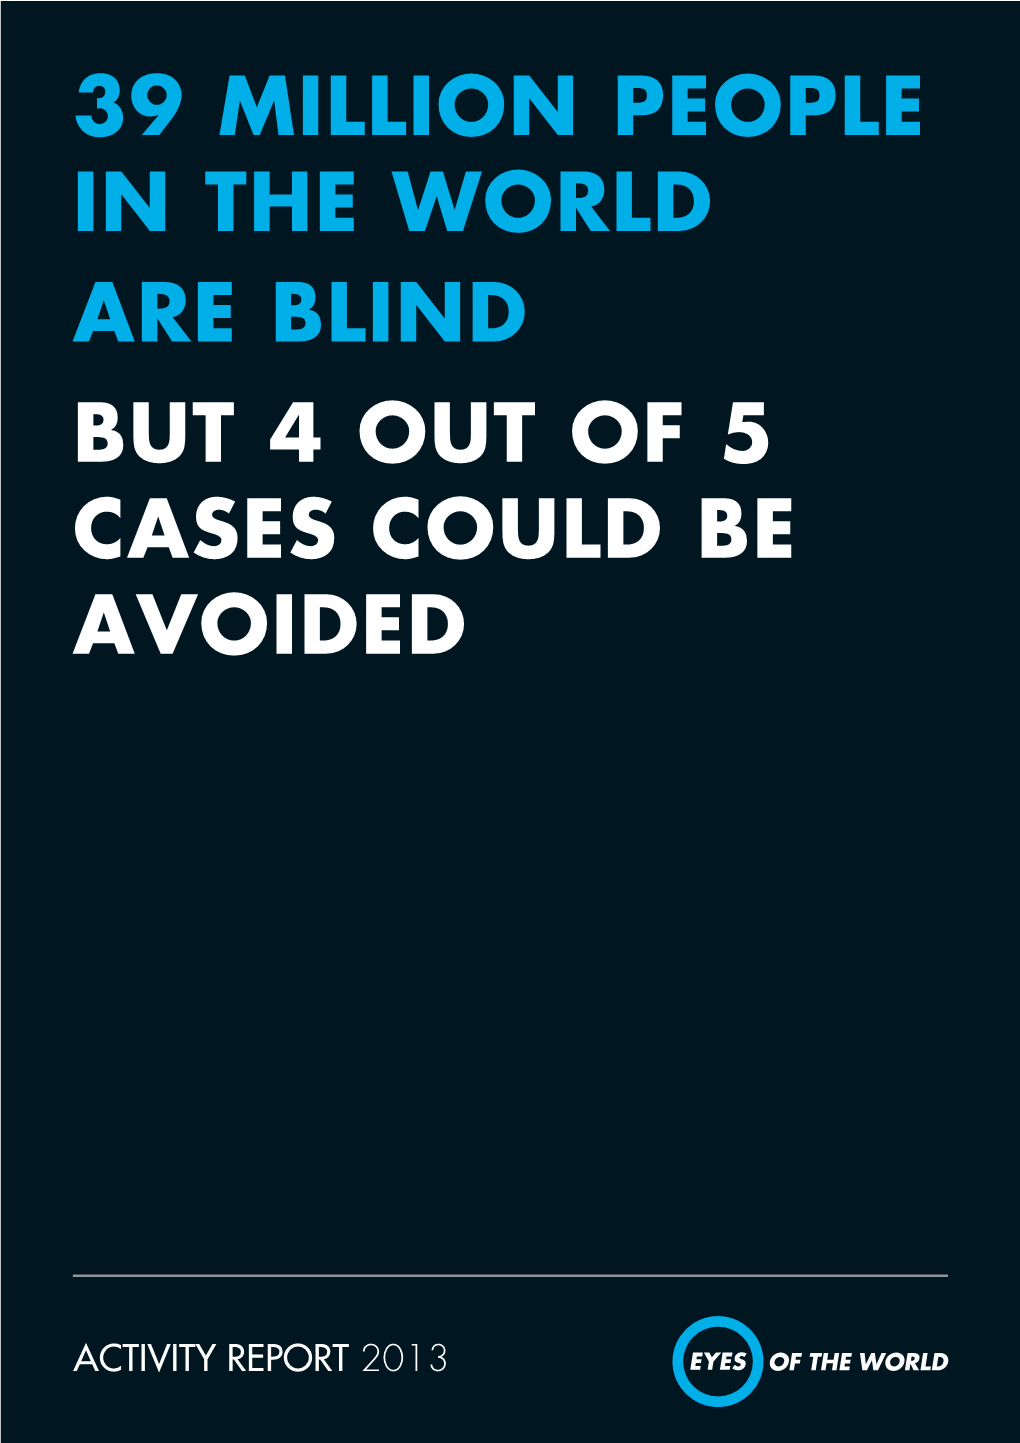 39 Million People in the World Are Blind but 4 out of 5 Cases Could Be Avoided